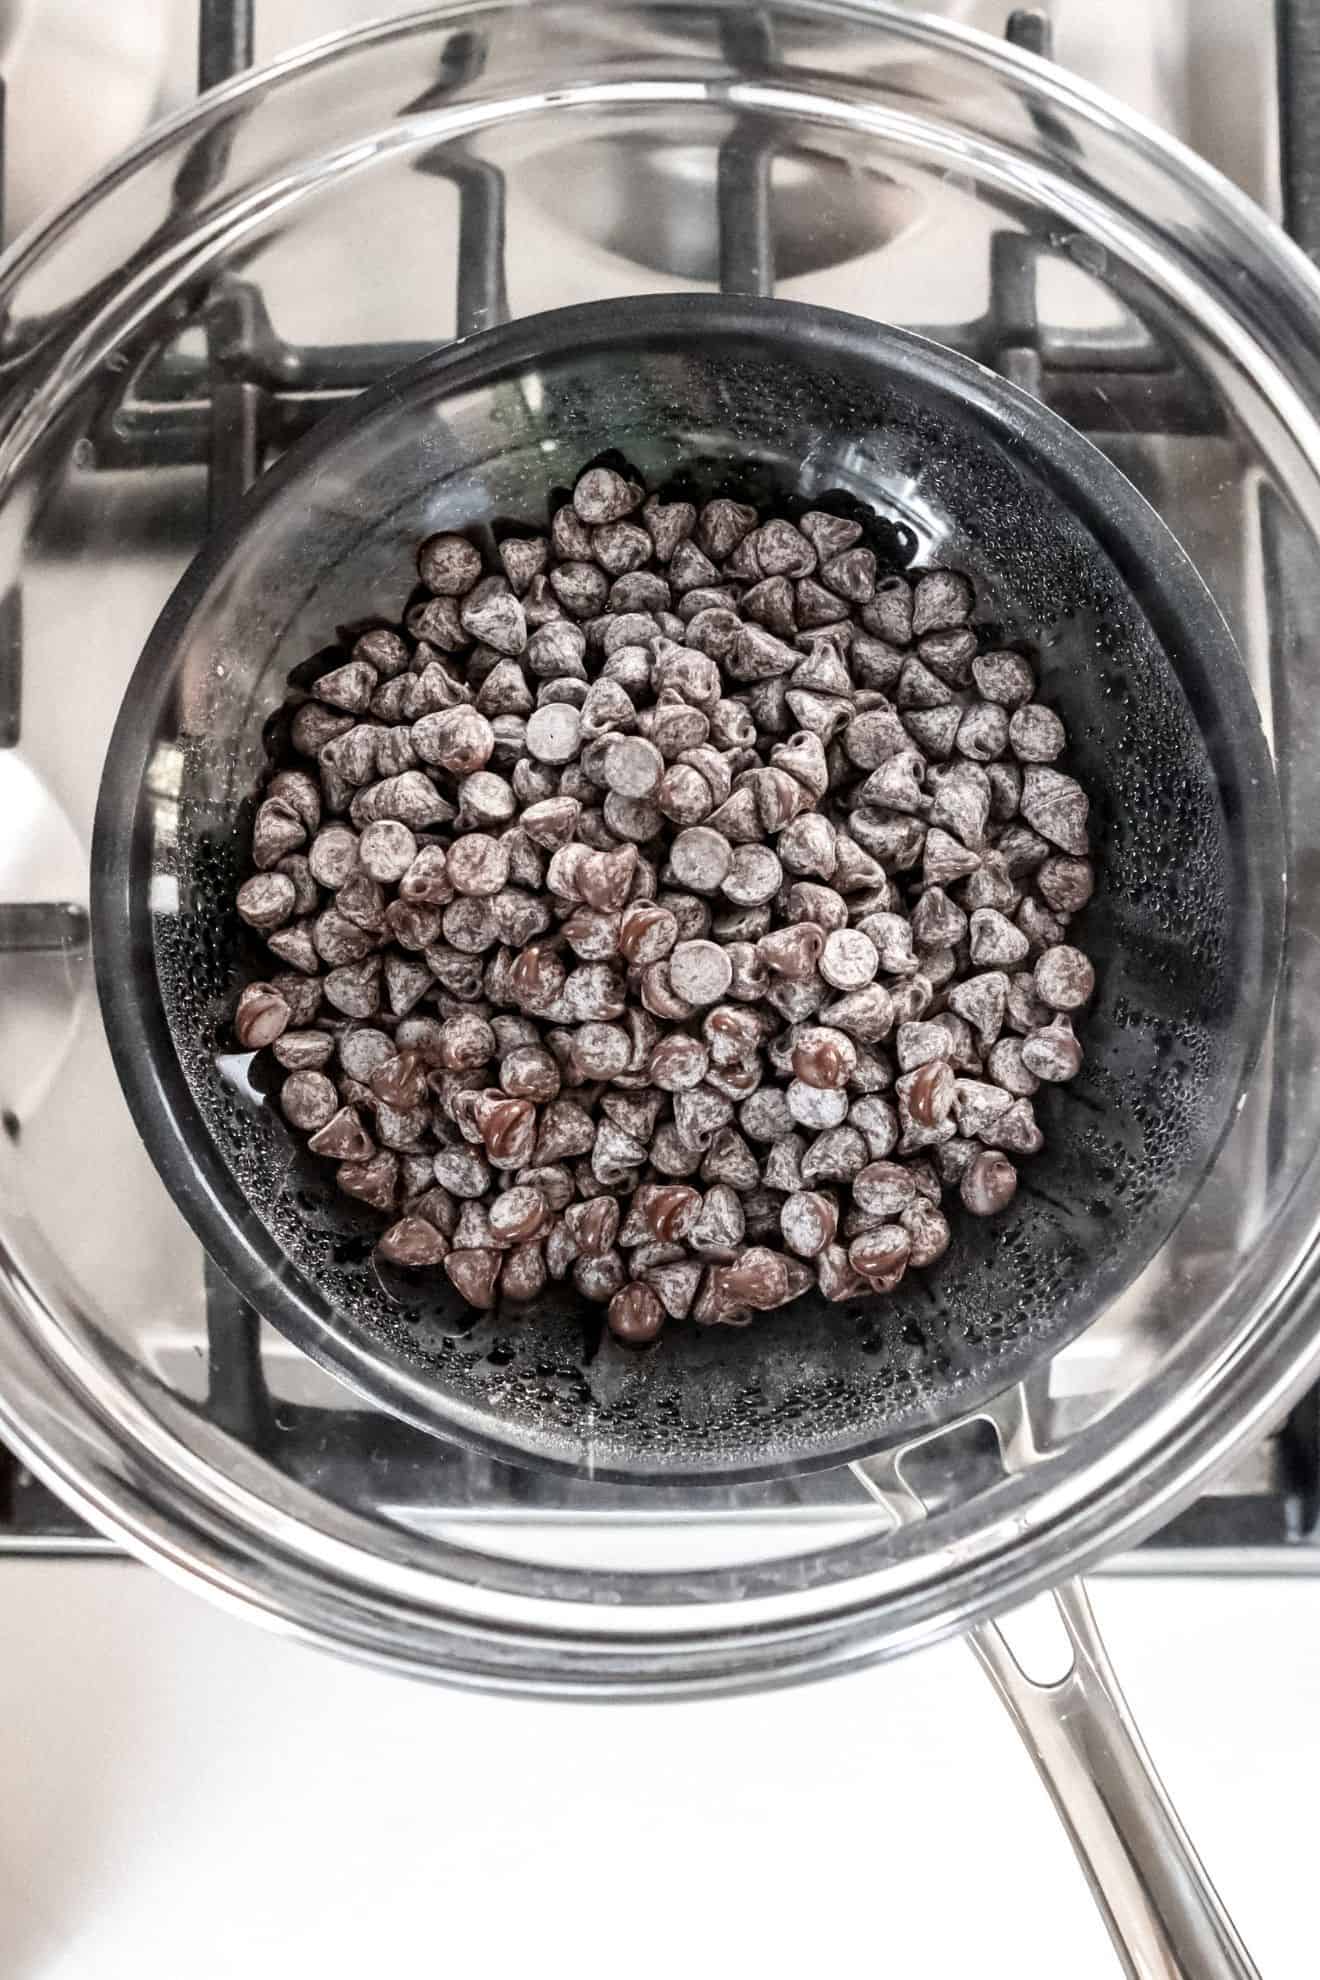 This is an overhead image of a pot on a stove. On top of the pot is a glass bowl with chocolate chips.